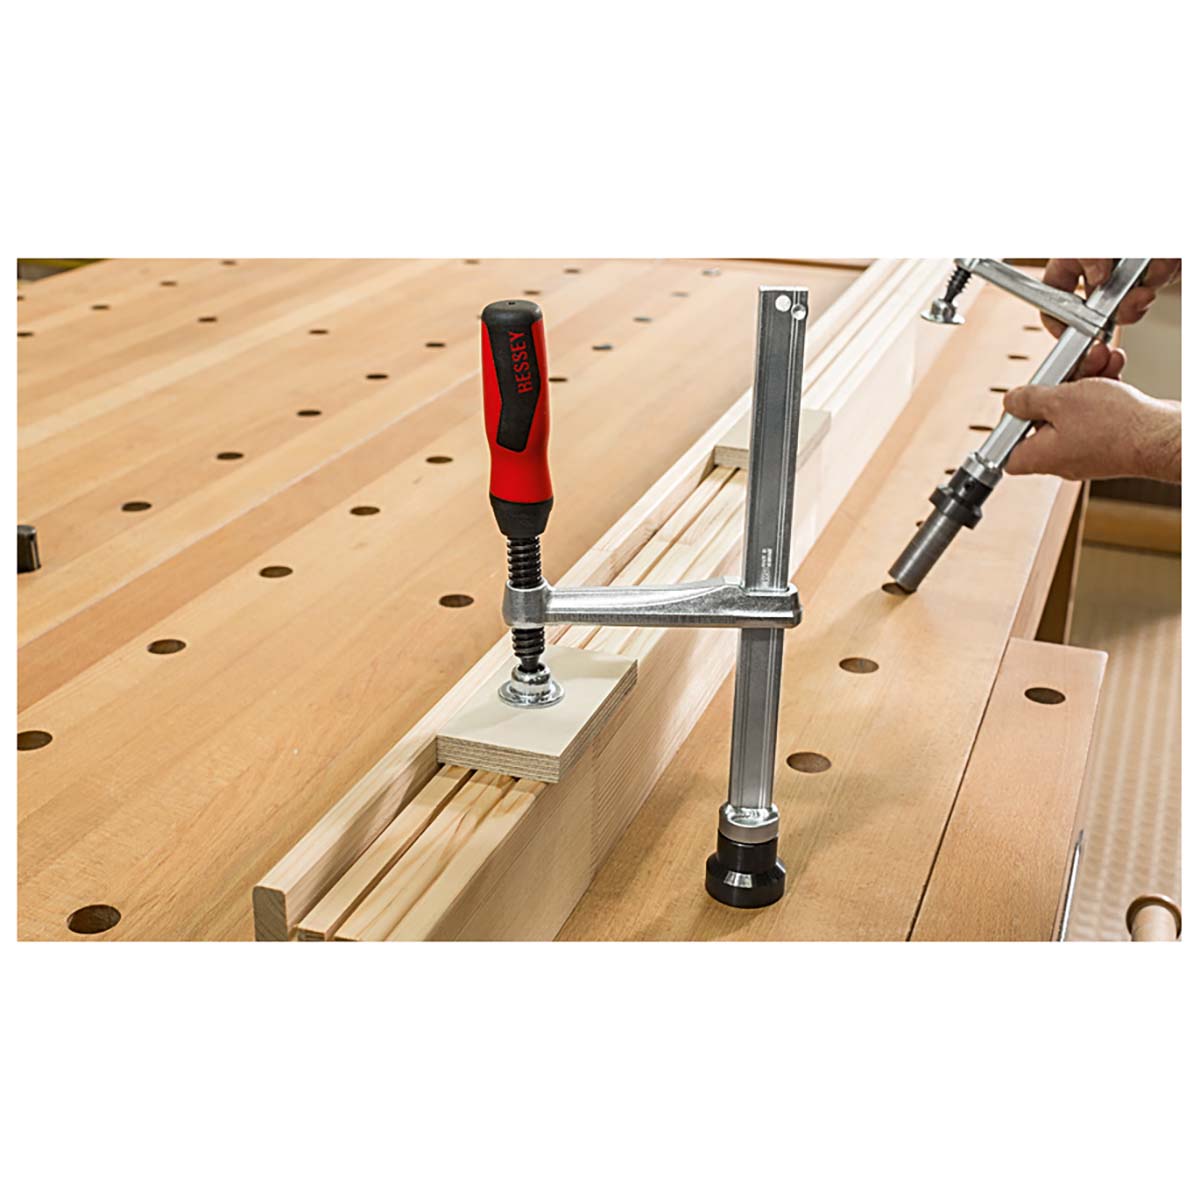 Bessey TW16AW19 - Adaptateur pour fixations Bessey TW16AW19